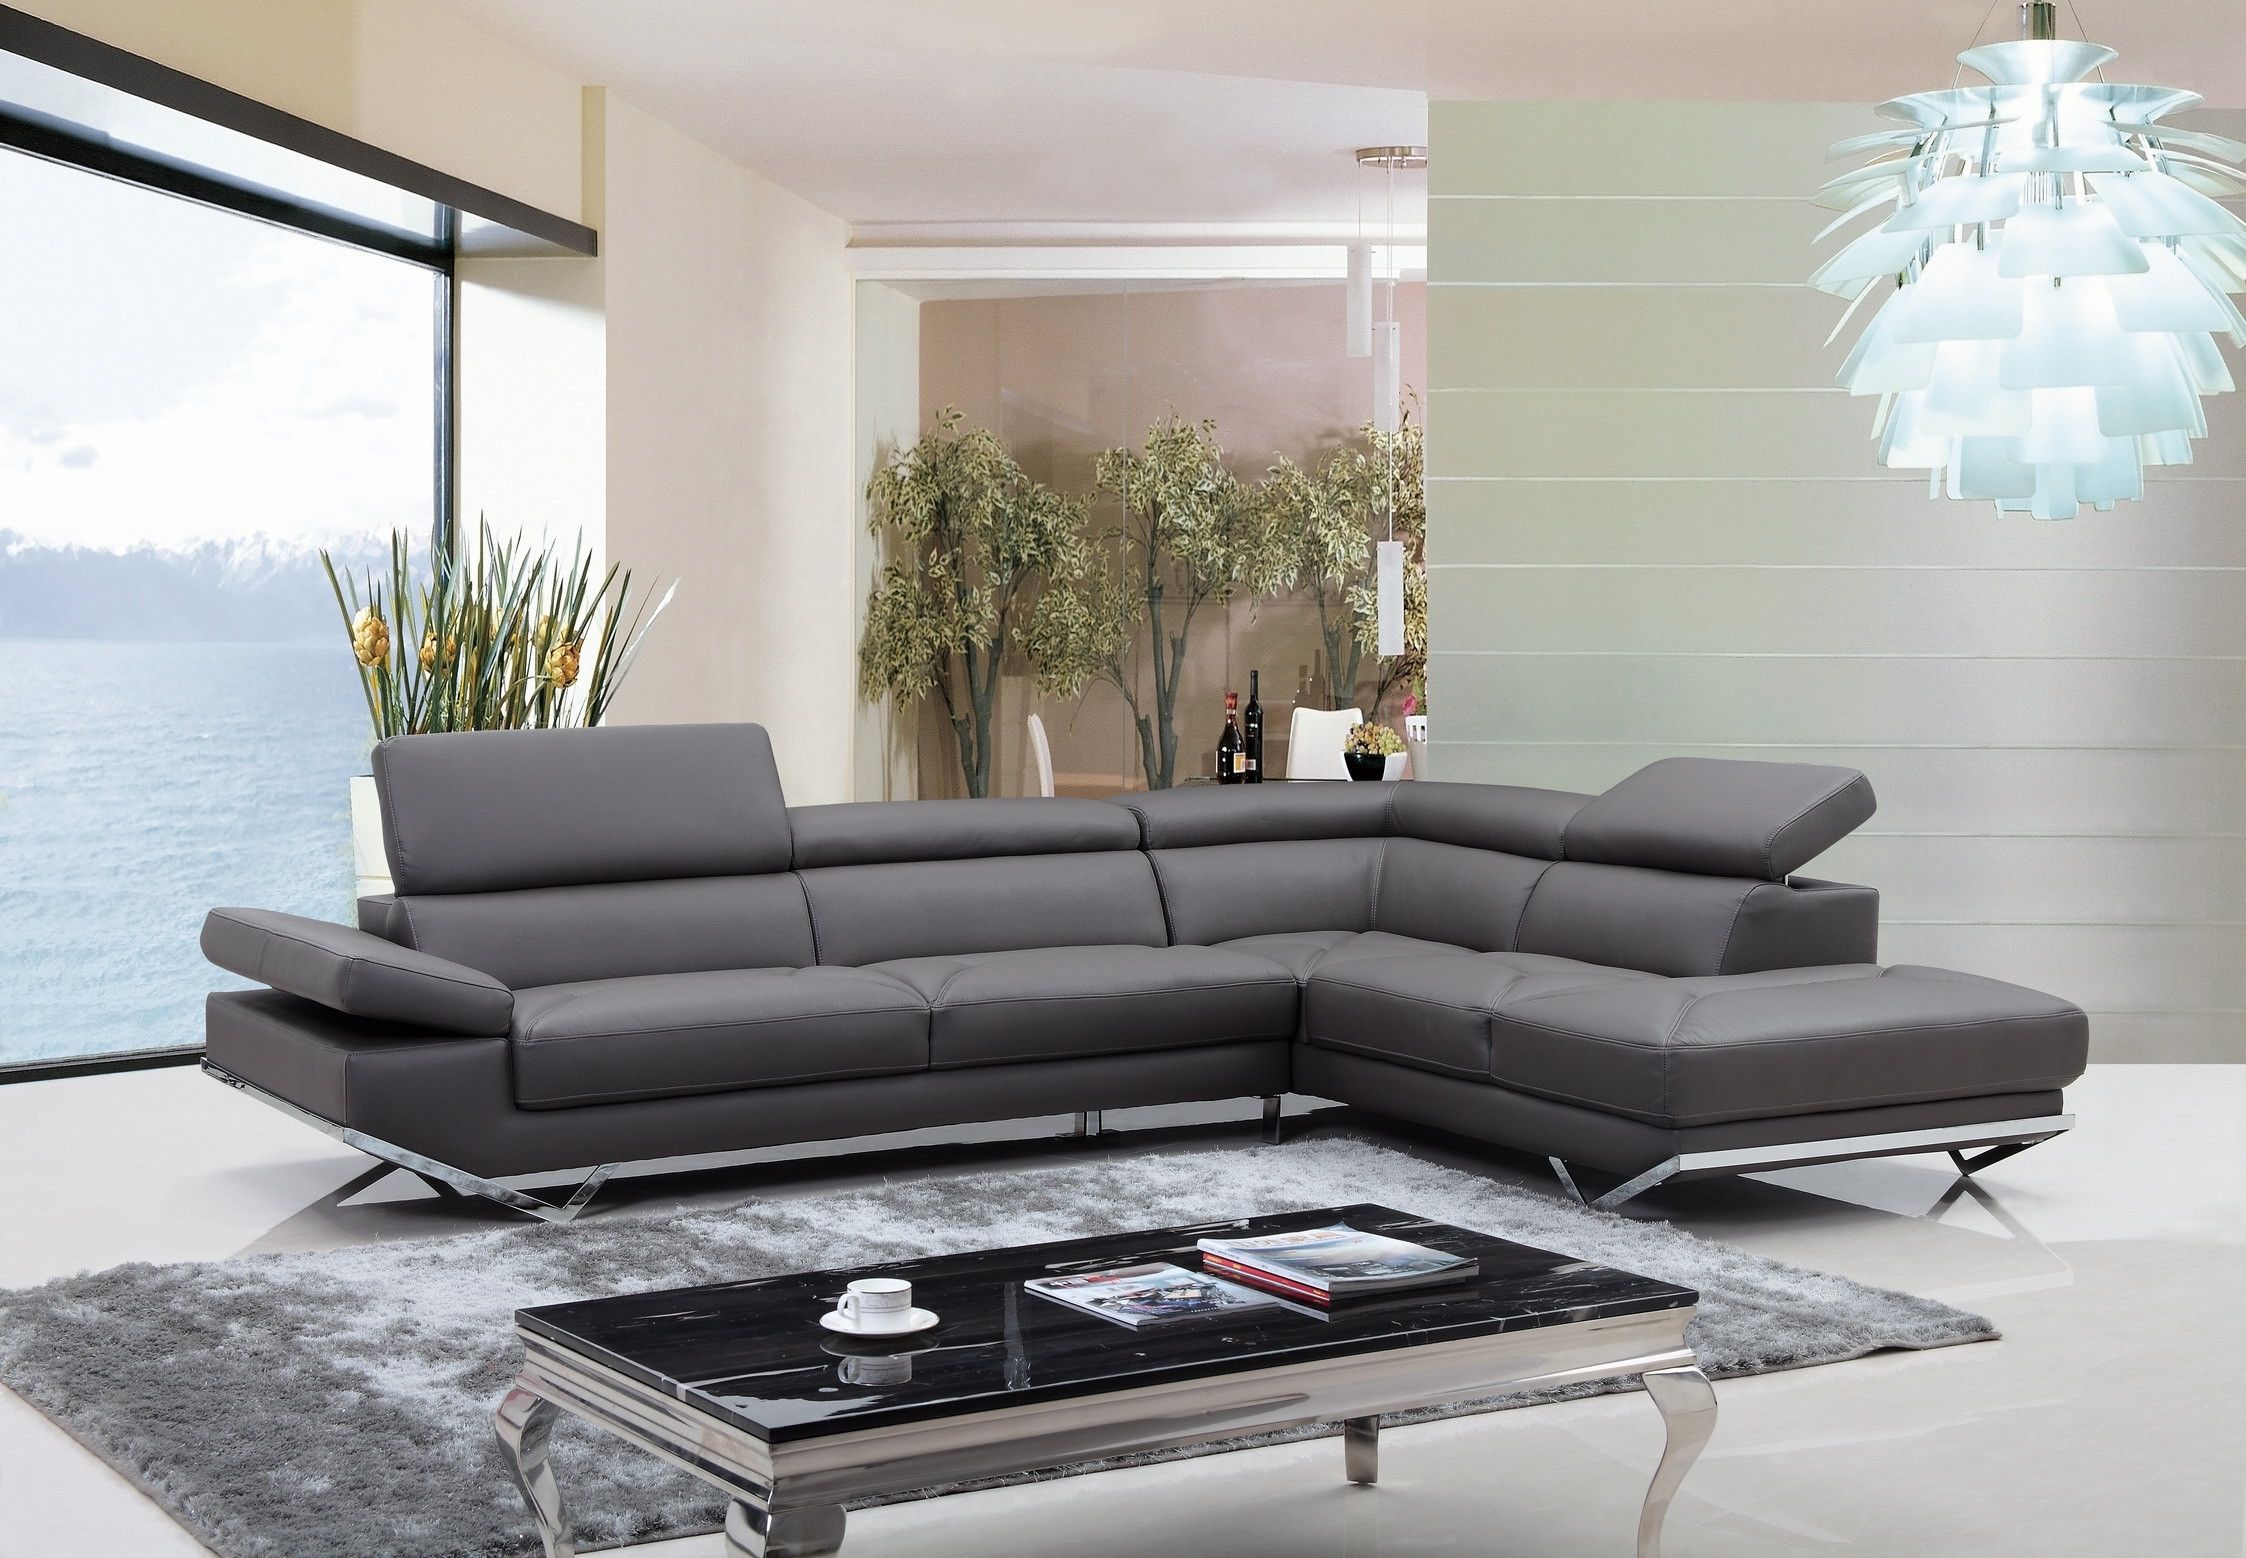 Casa Quebec Modern Dark Grey Eco Leather Sectional Sofa With Quebec Sectional Sofas (View 1 of 10)